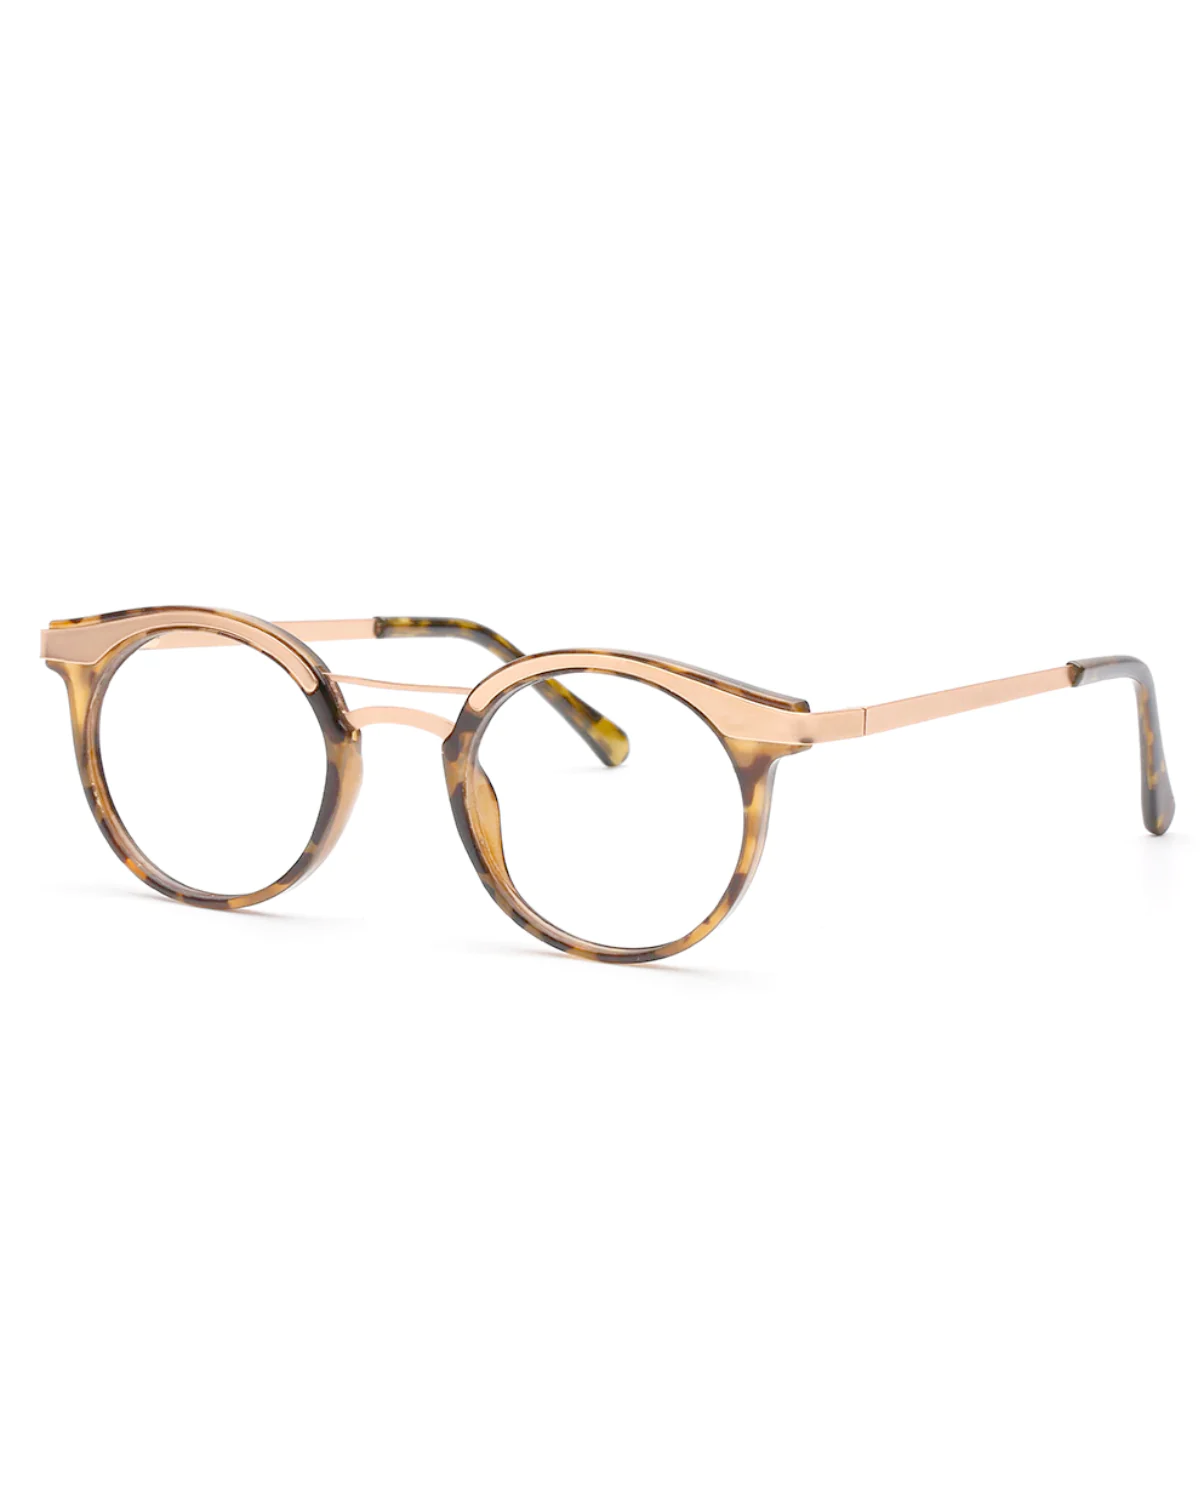 Alessa Rose Gold Metal Frame Readers 1.25 (Tortoise Accent)